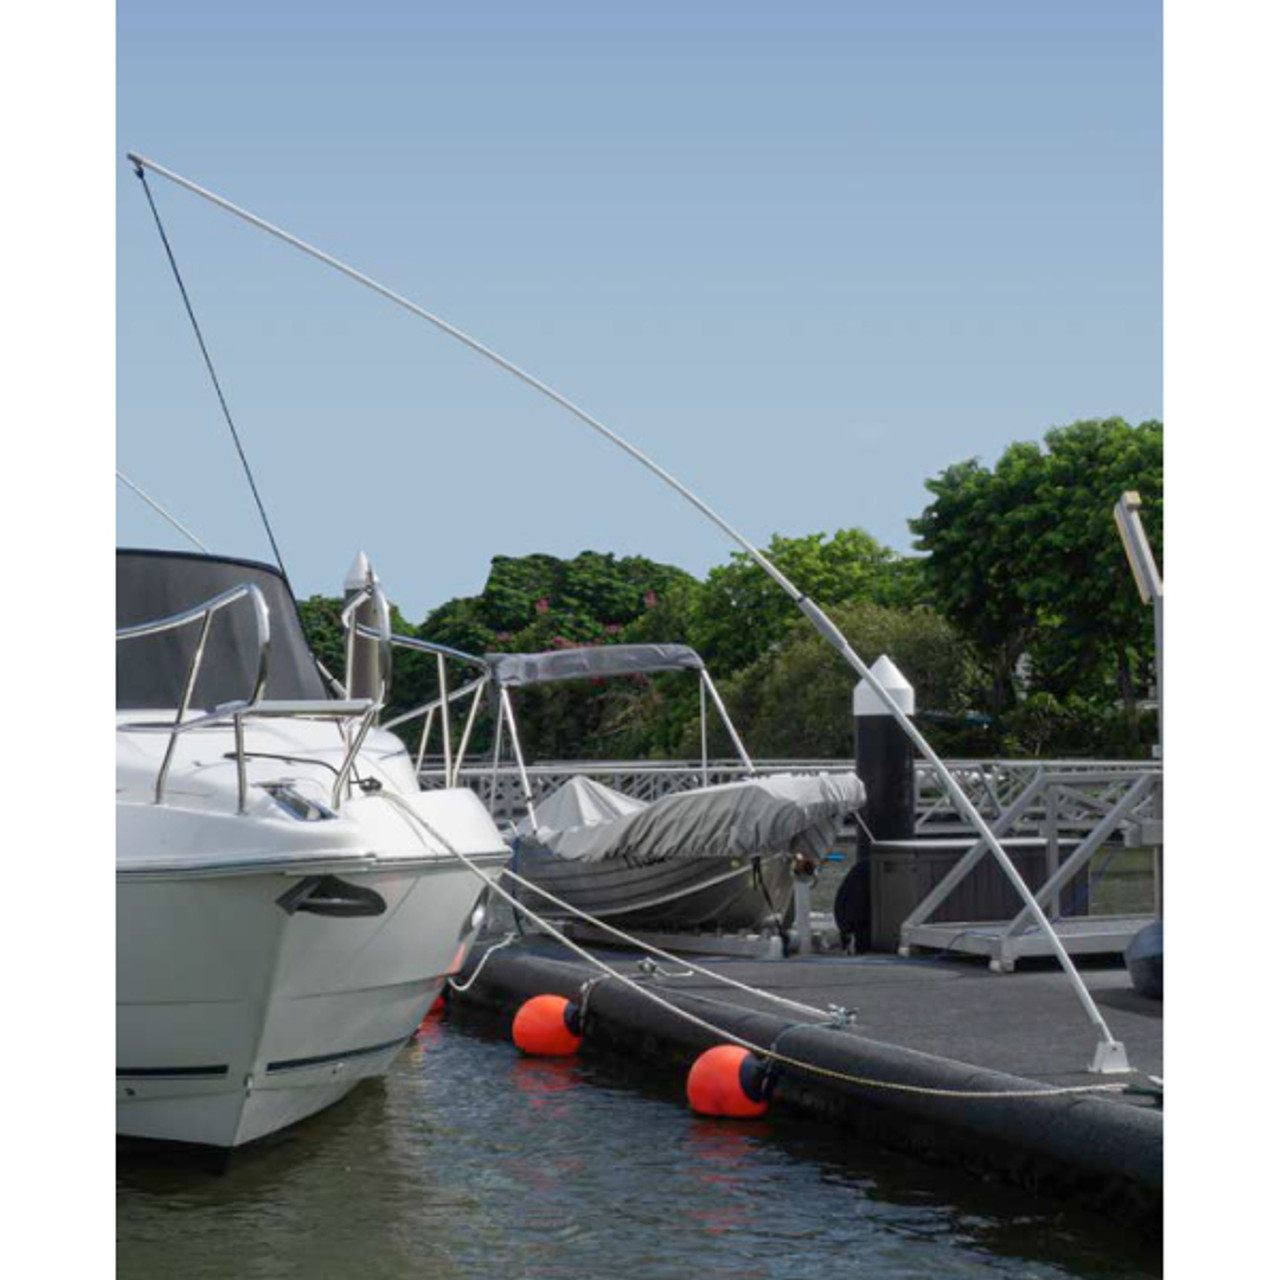 Reelax Mooring Whip Cast Super / Heavy Duty - Suits 9-17m Boats